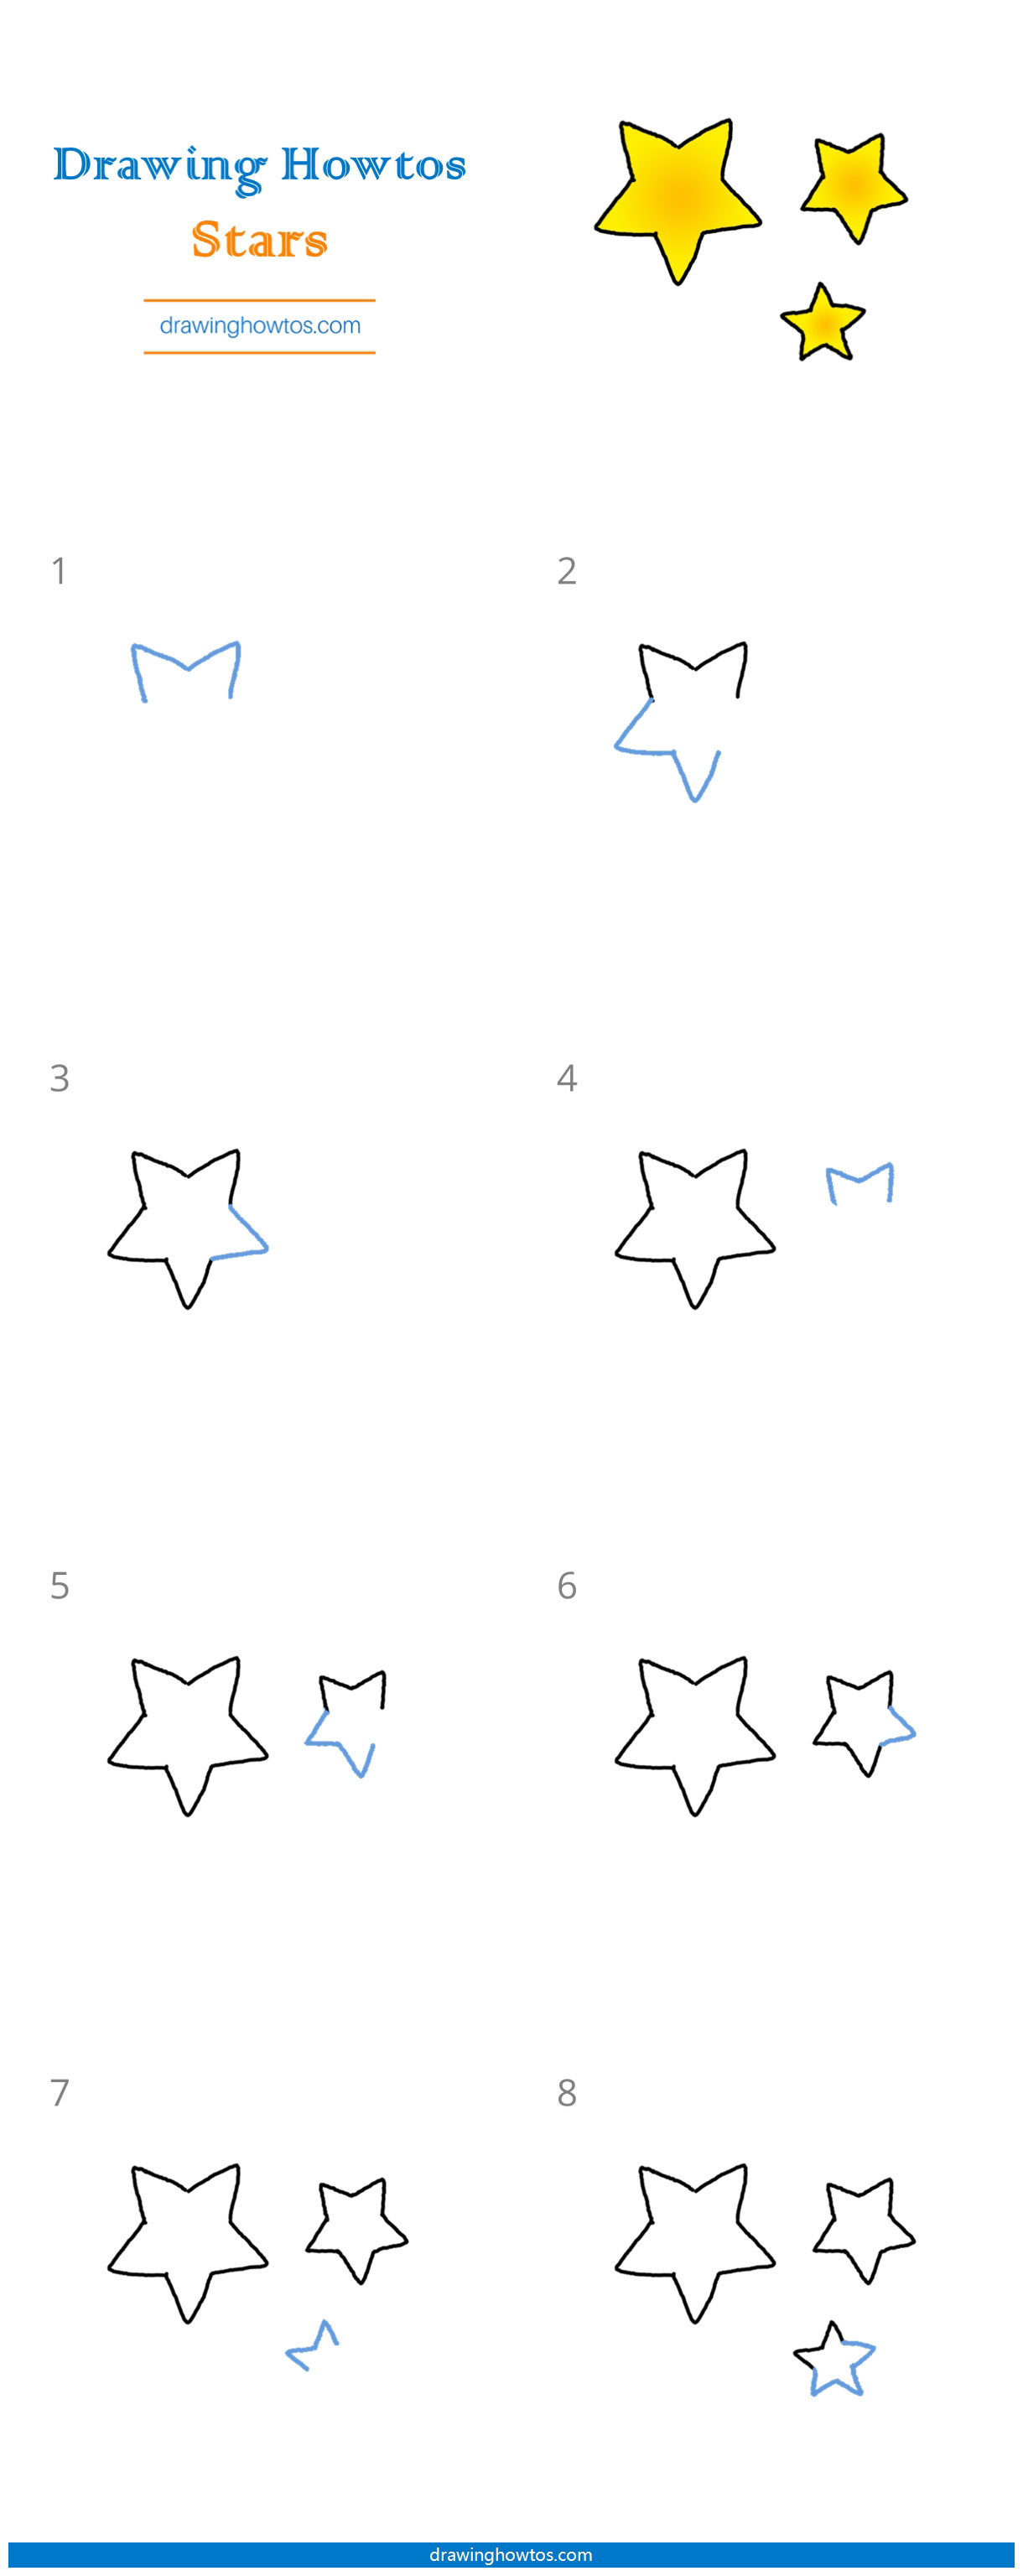 How to Draw a Star Step by Step